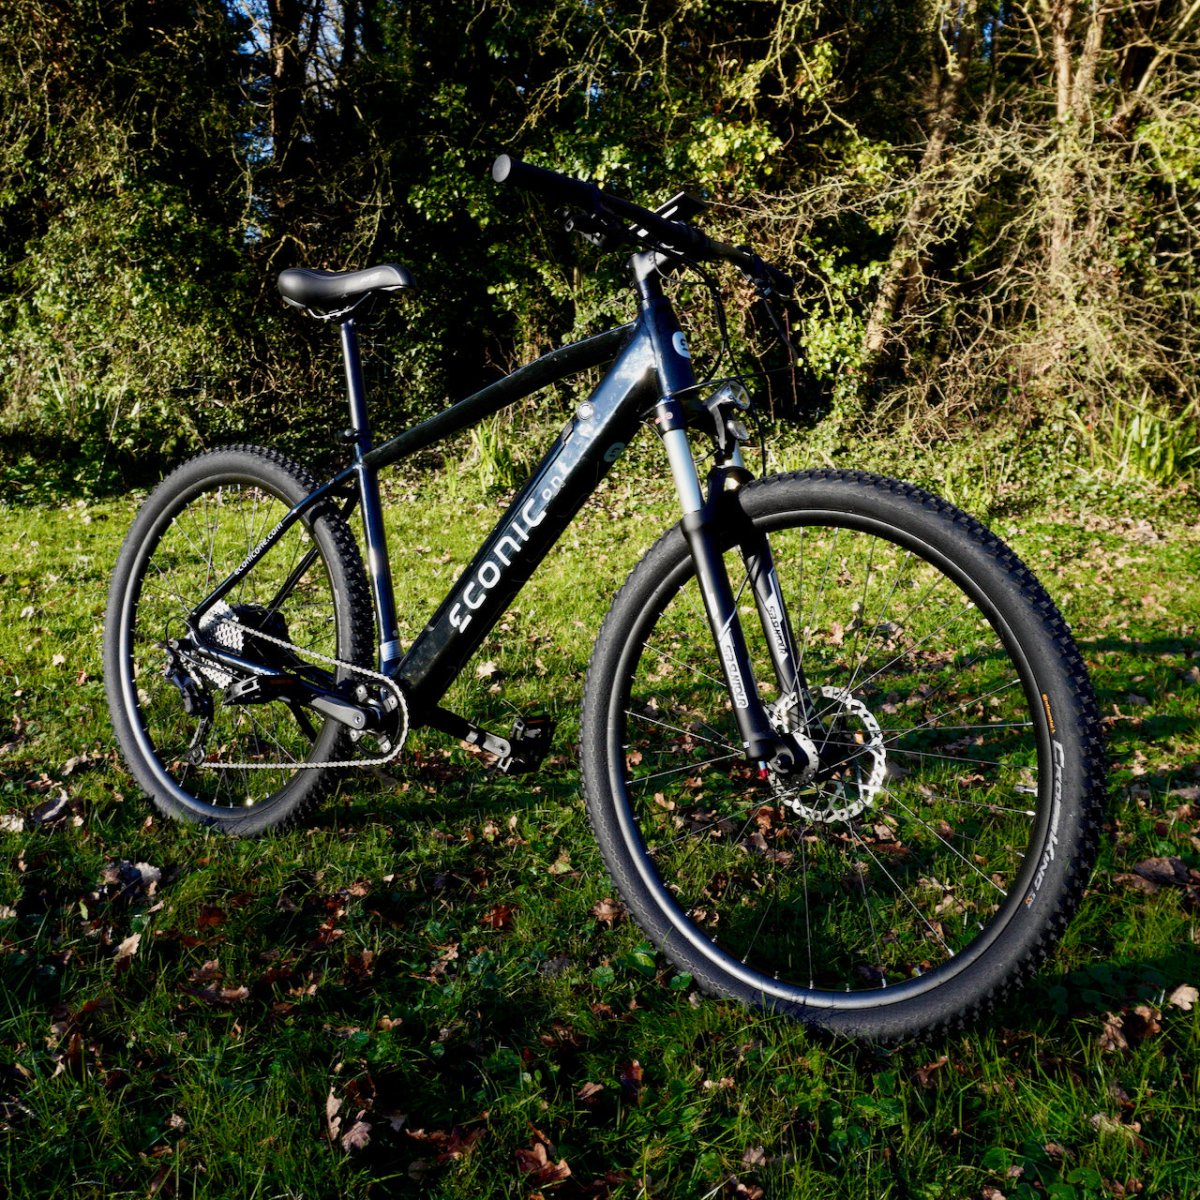 Electric mountain bike | Econic One Cross Country in black | Horizon Micromobility